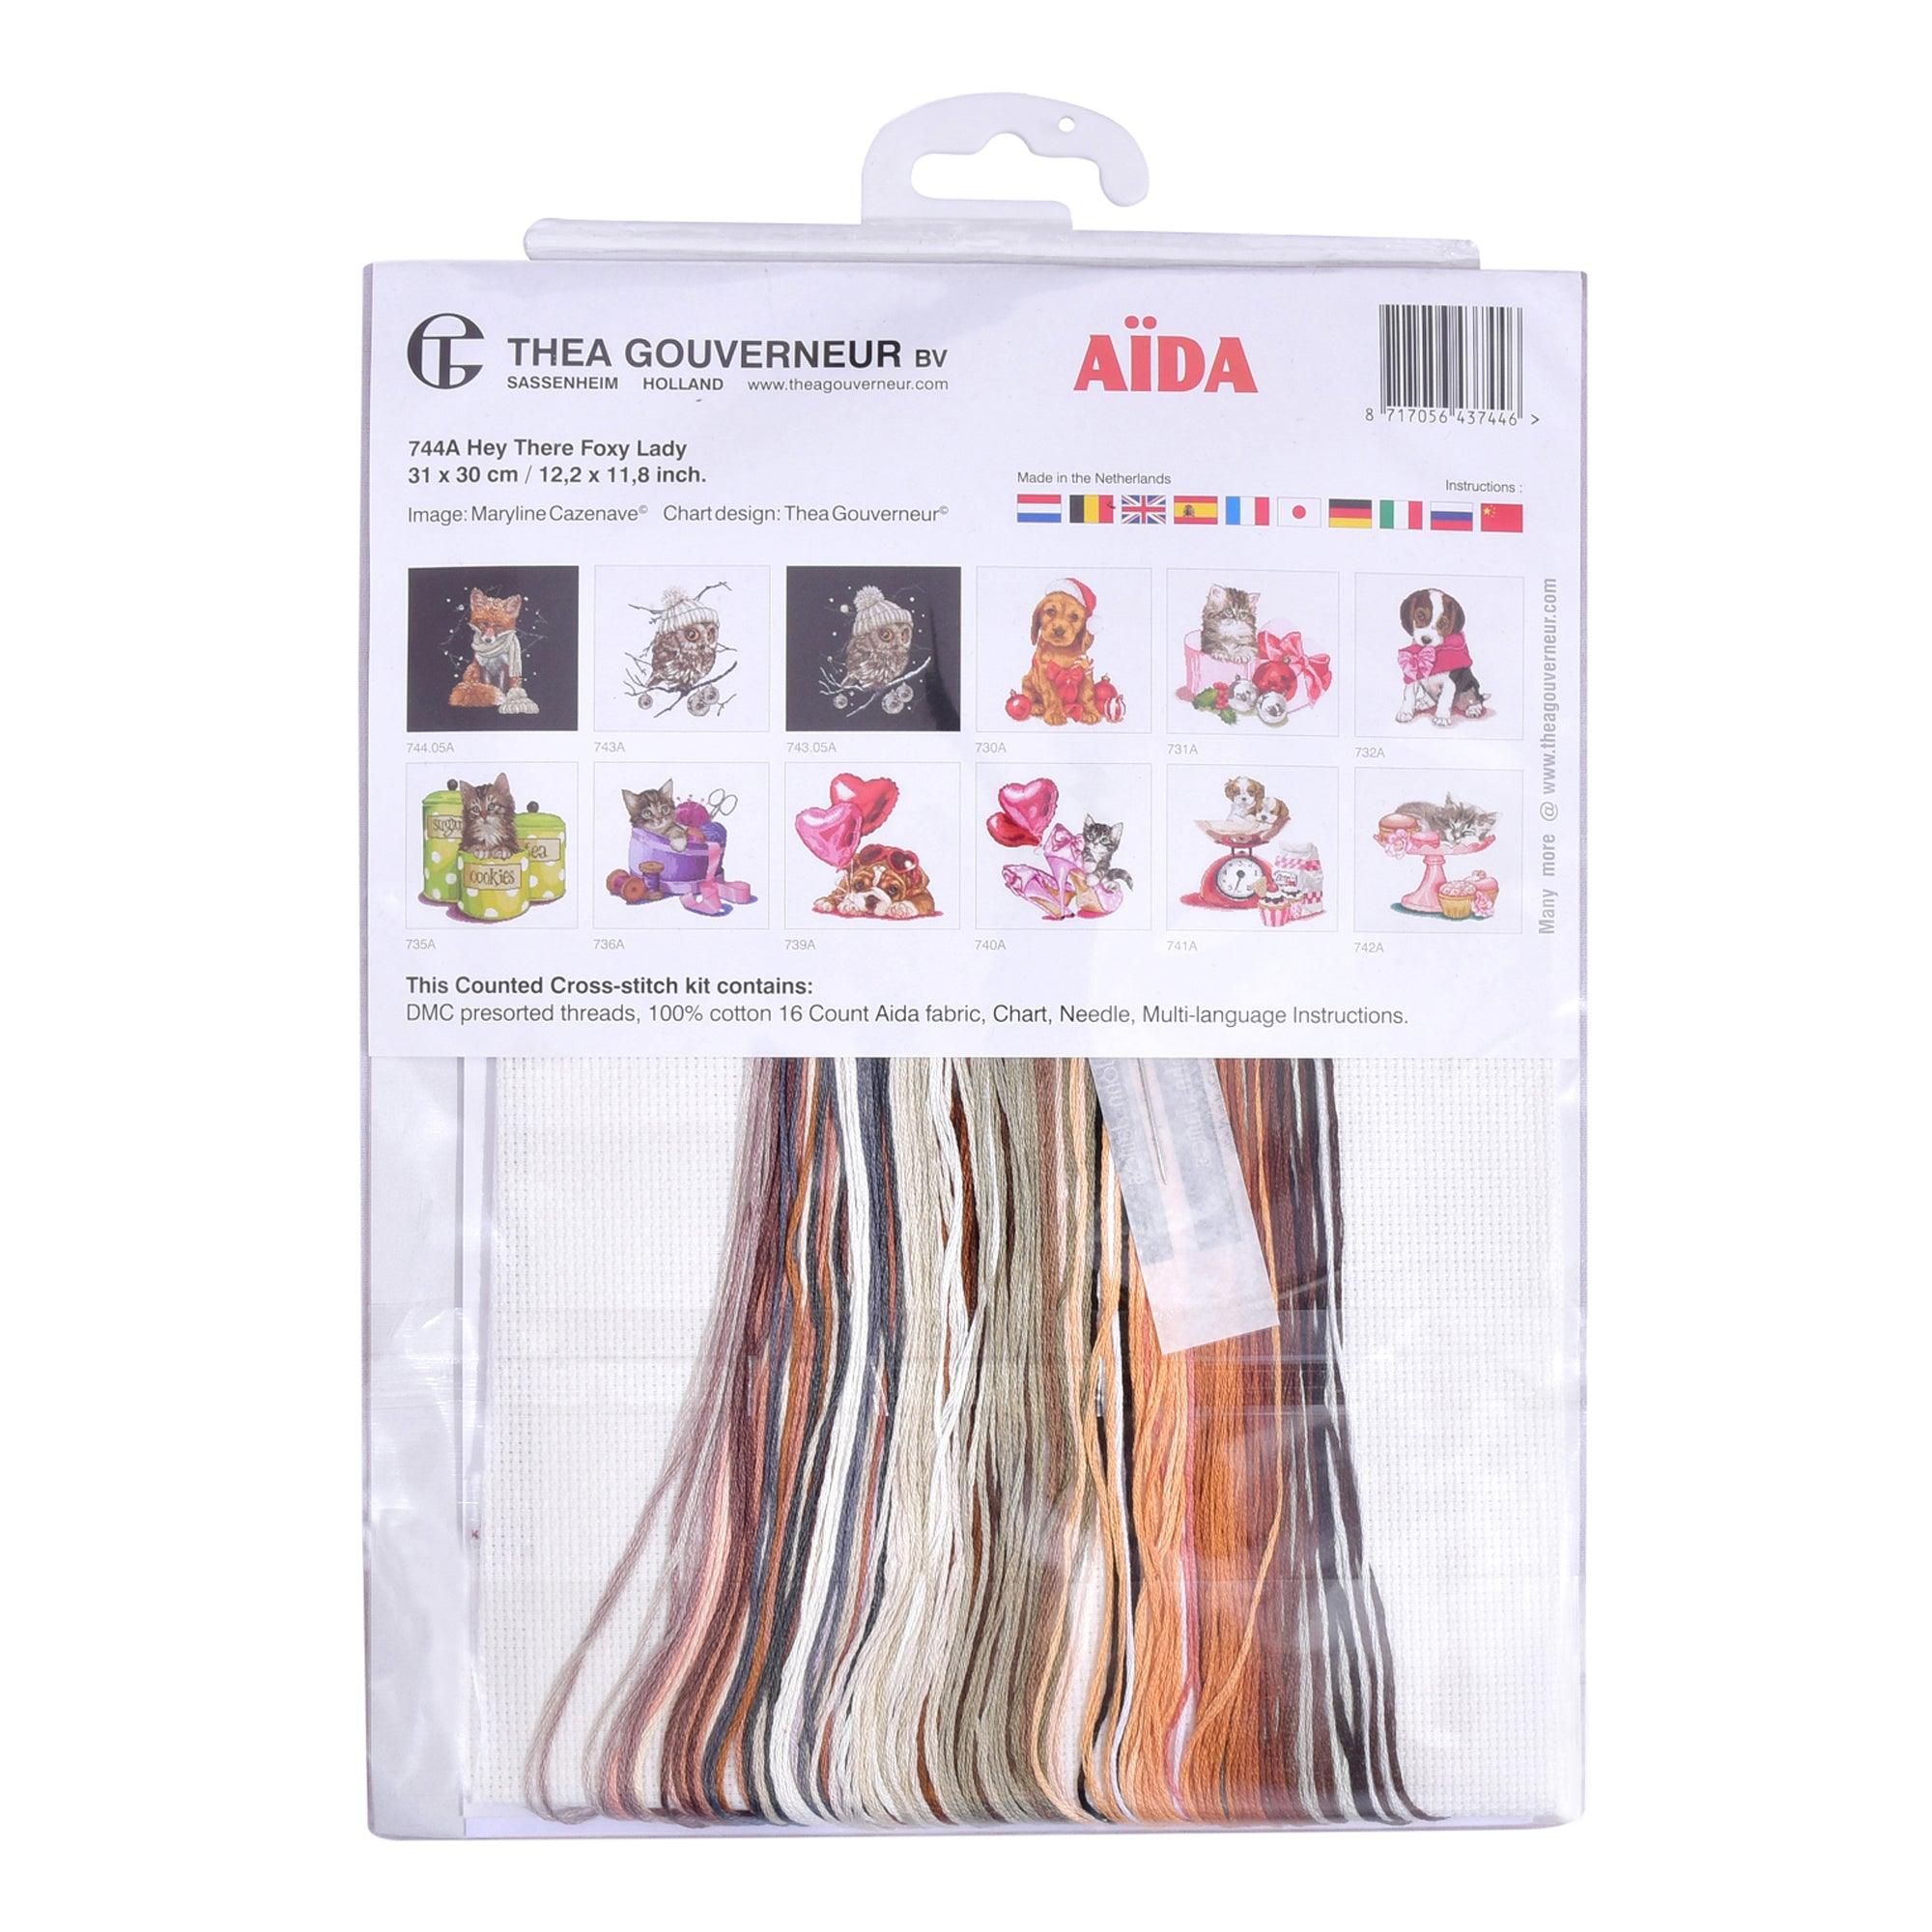 Thea Gouverneur - Counted Cross Stitch Kit - Hey There Foxy Lady - Aida - 16 count - 744A - Thea Gouverneur Since 1959